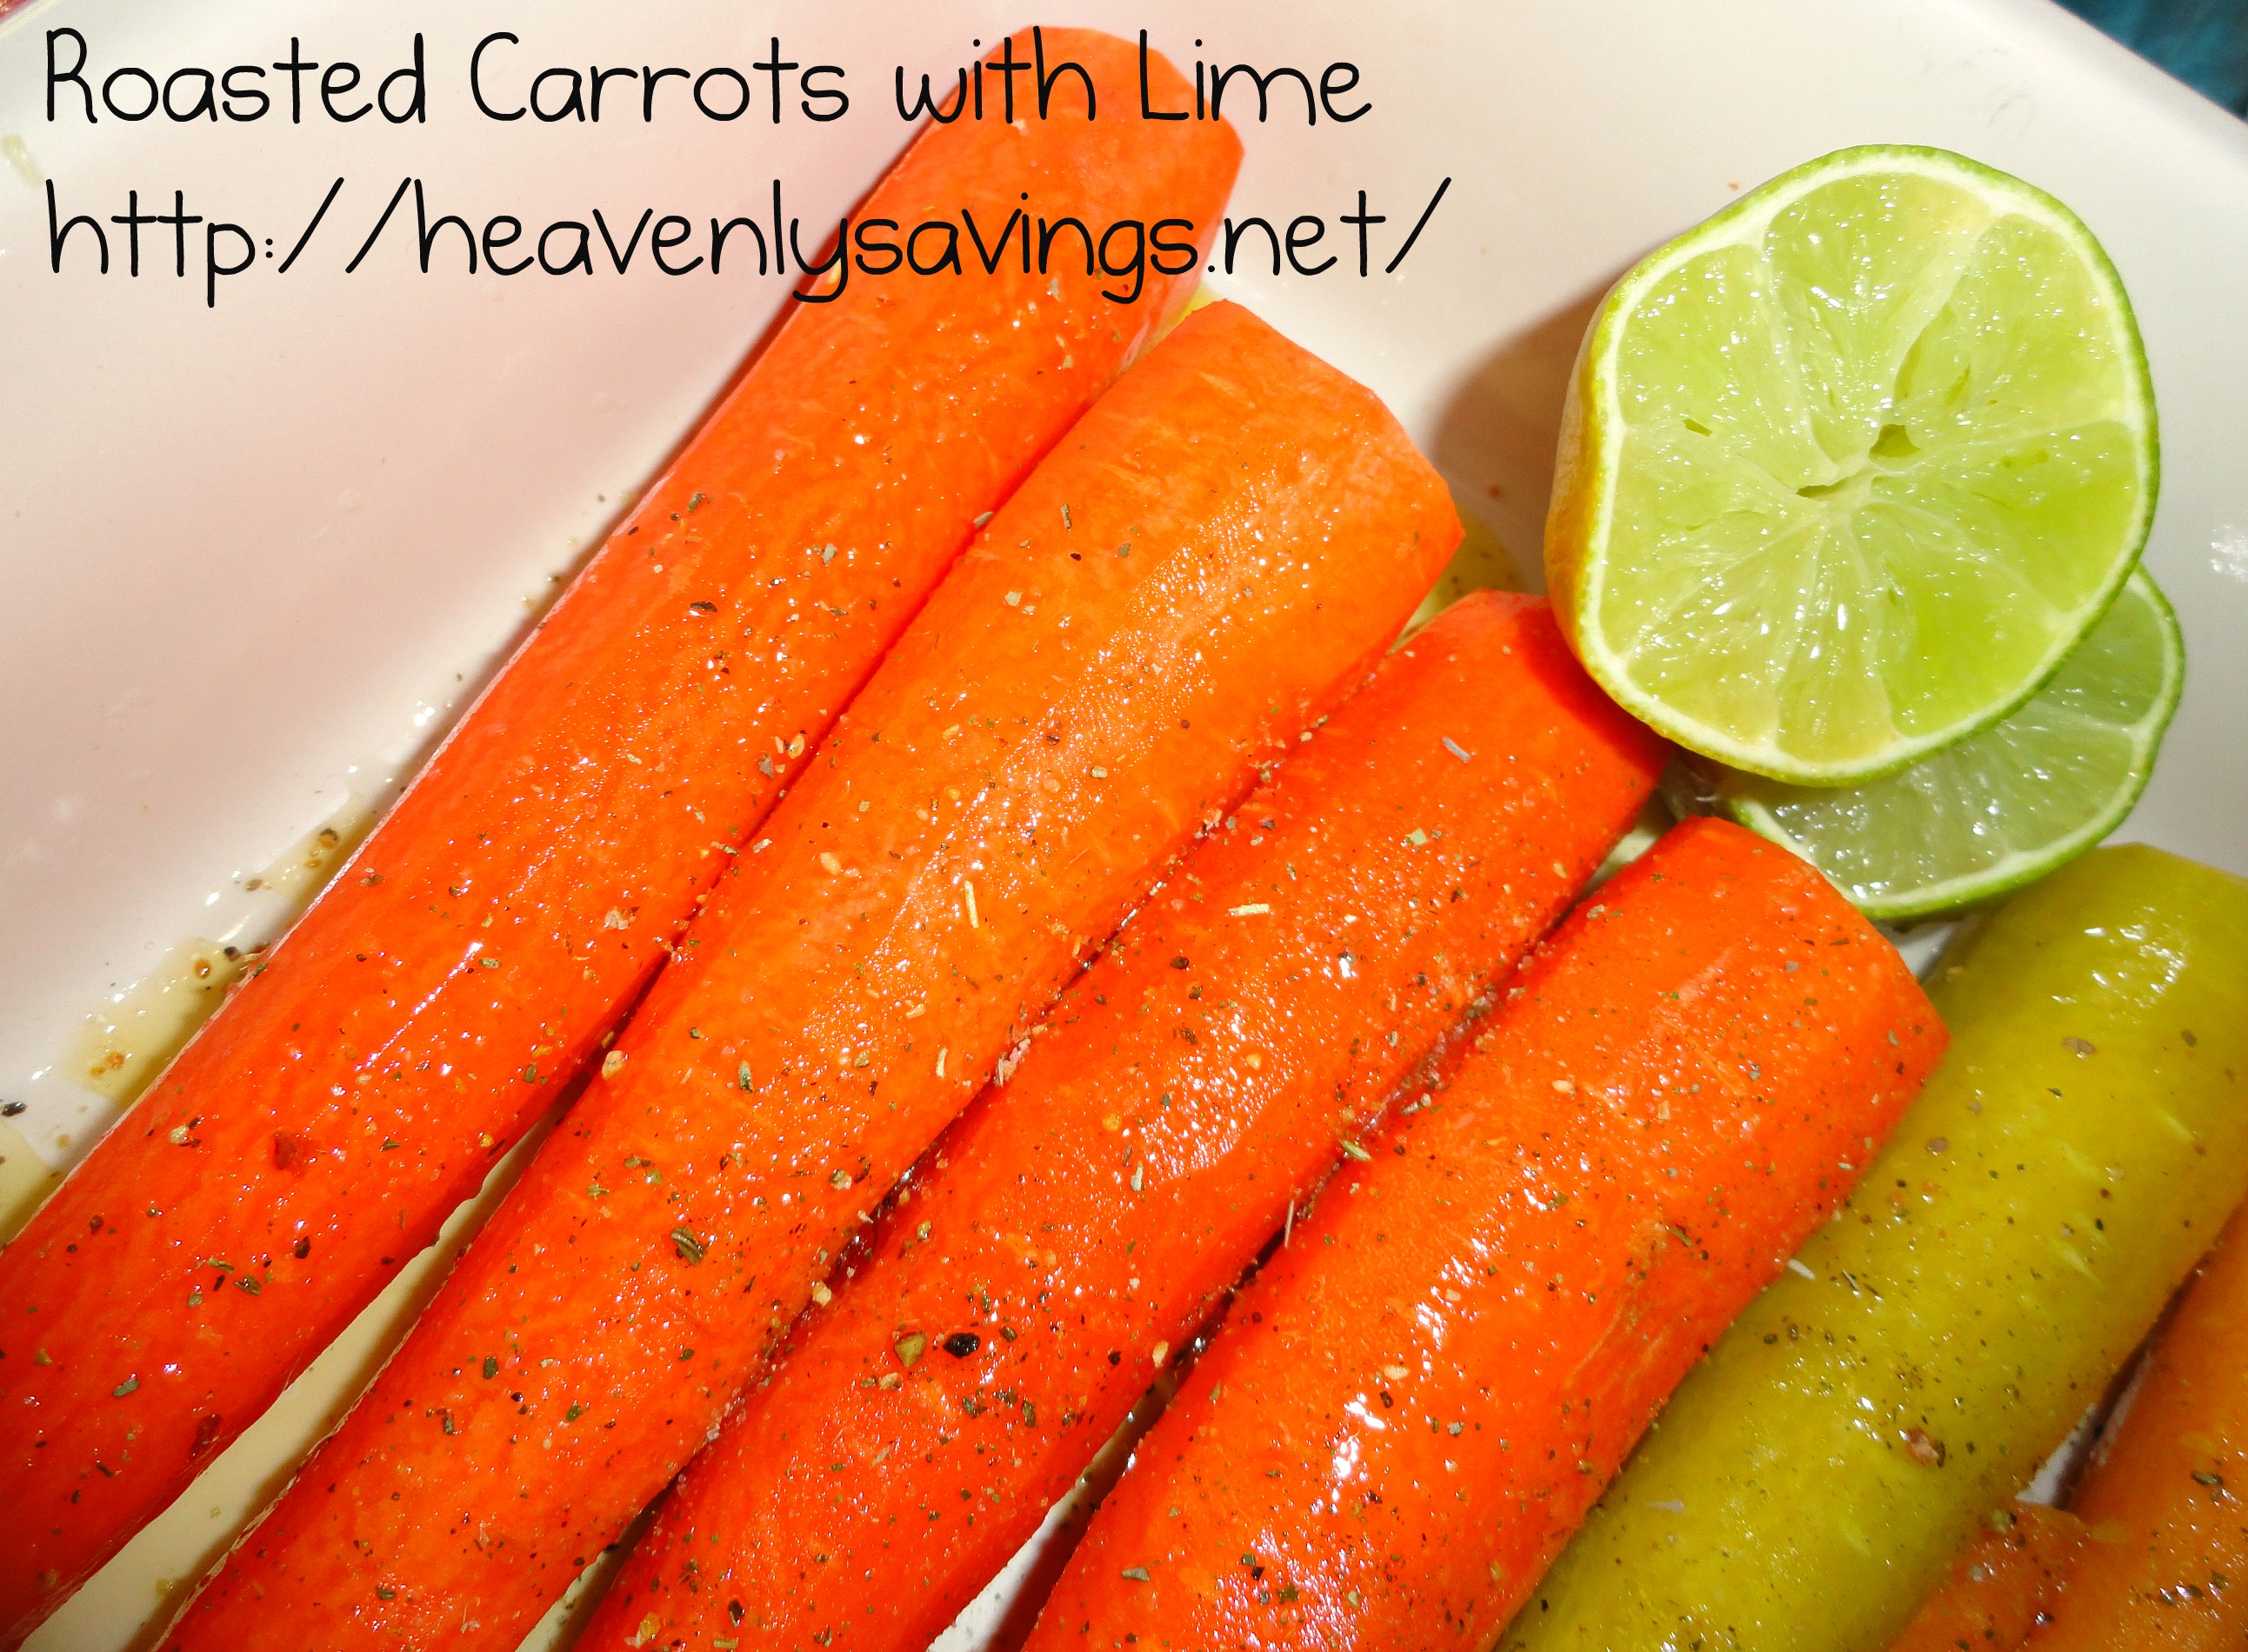 Roasted Carrots with Lime